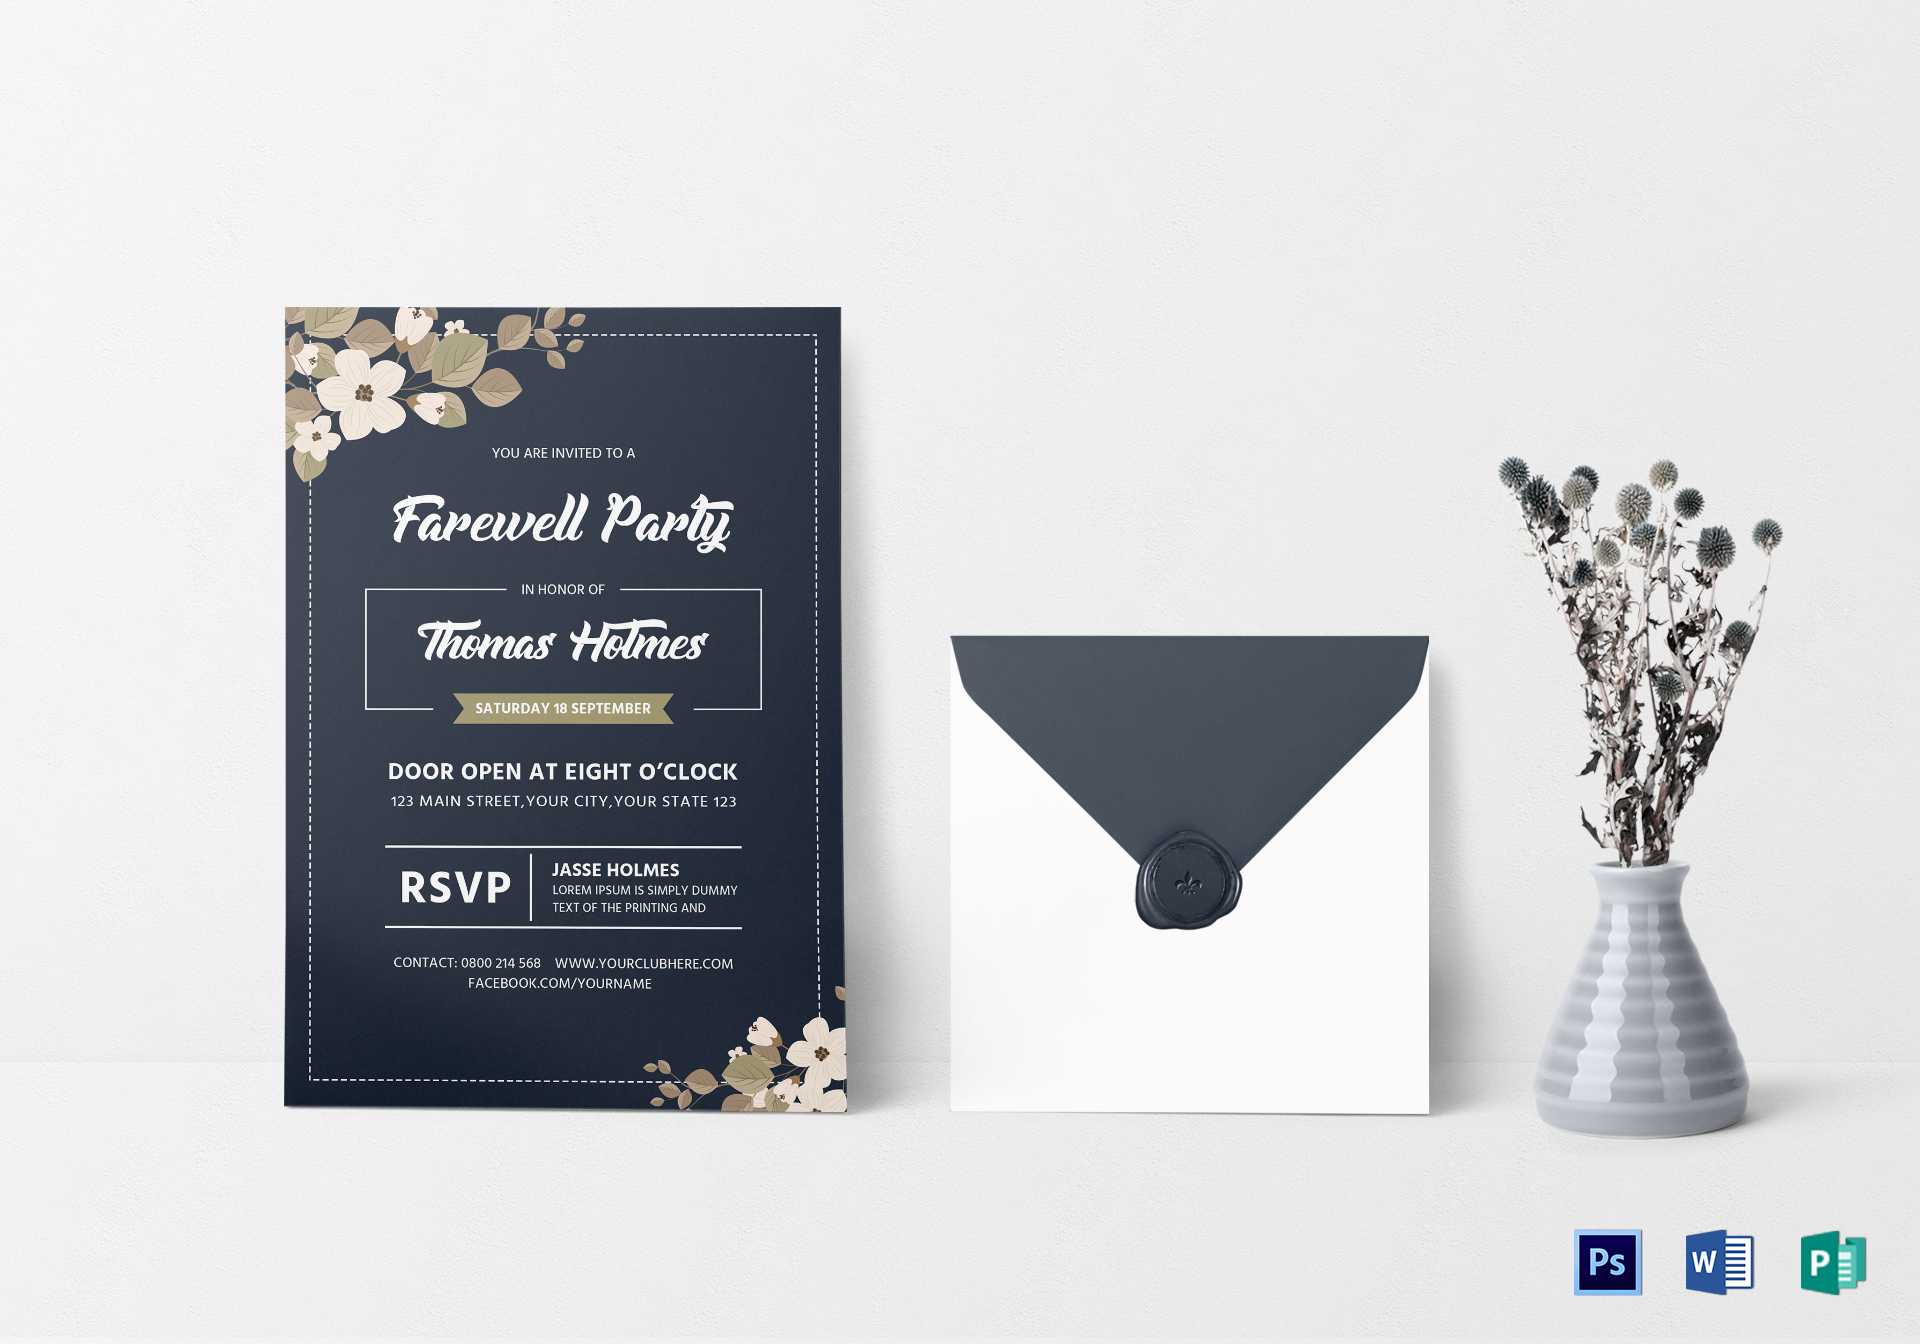 Farewell Party Invitation Card Template Pertaining To Farewell Invitation Card Template